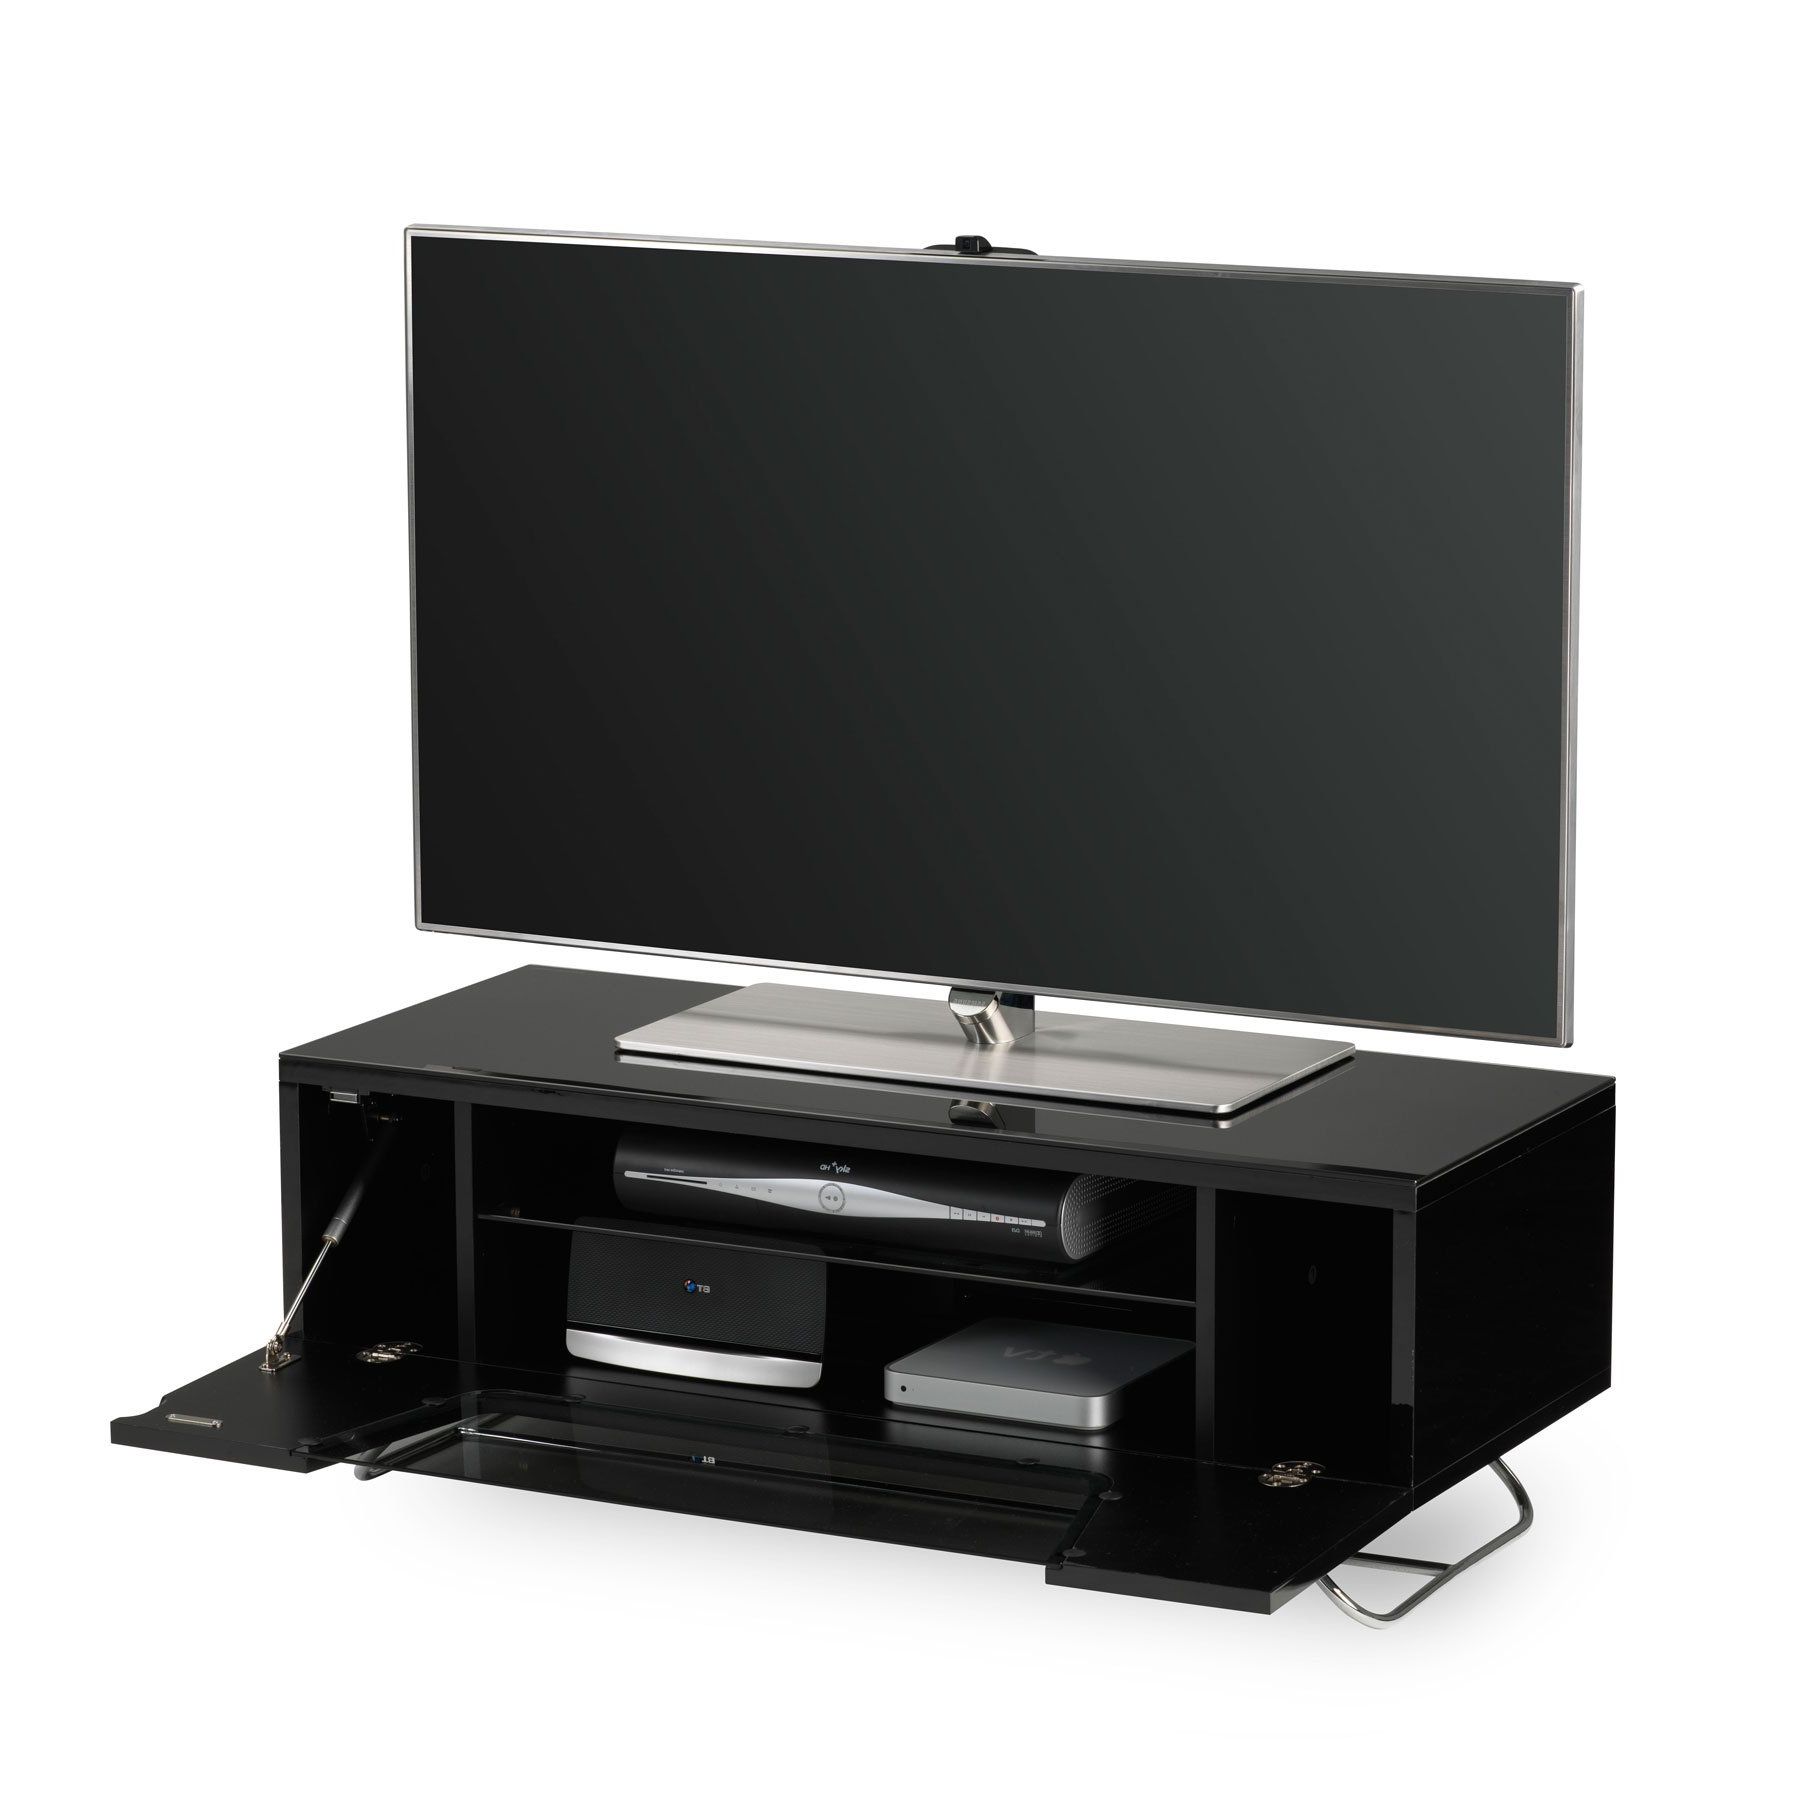 Leonid Tv Stands For Tvs Up To 50" With Regard To Most Popular Alphason Chromium 2 100cm Black Tv Stand For Up To 50" Tvs (View 20 of 25)